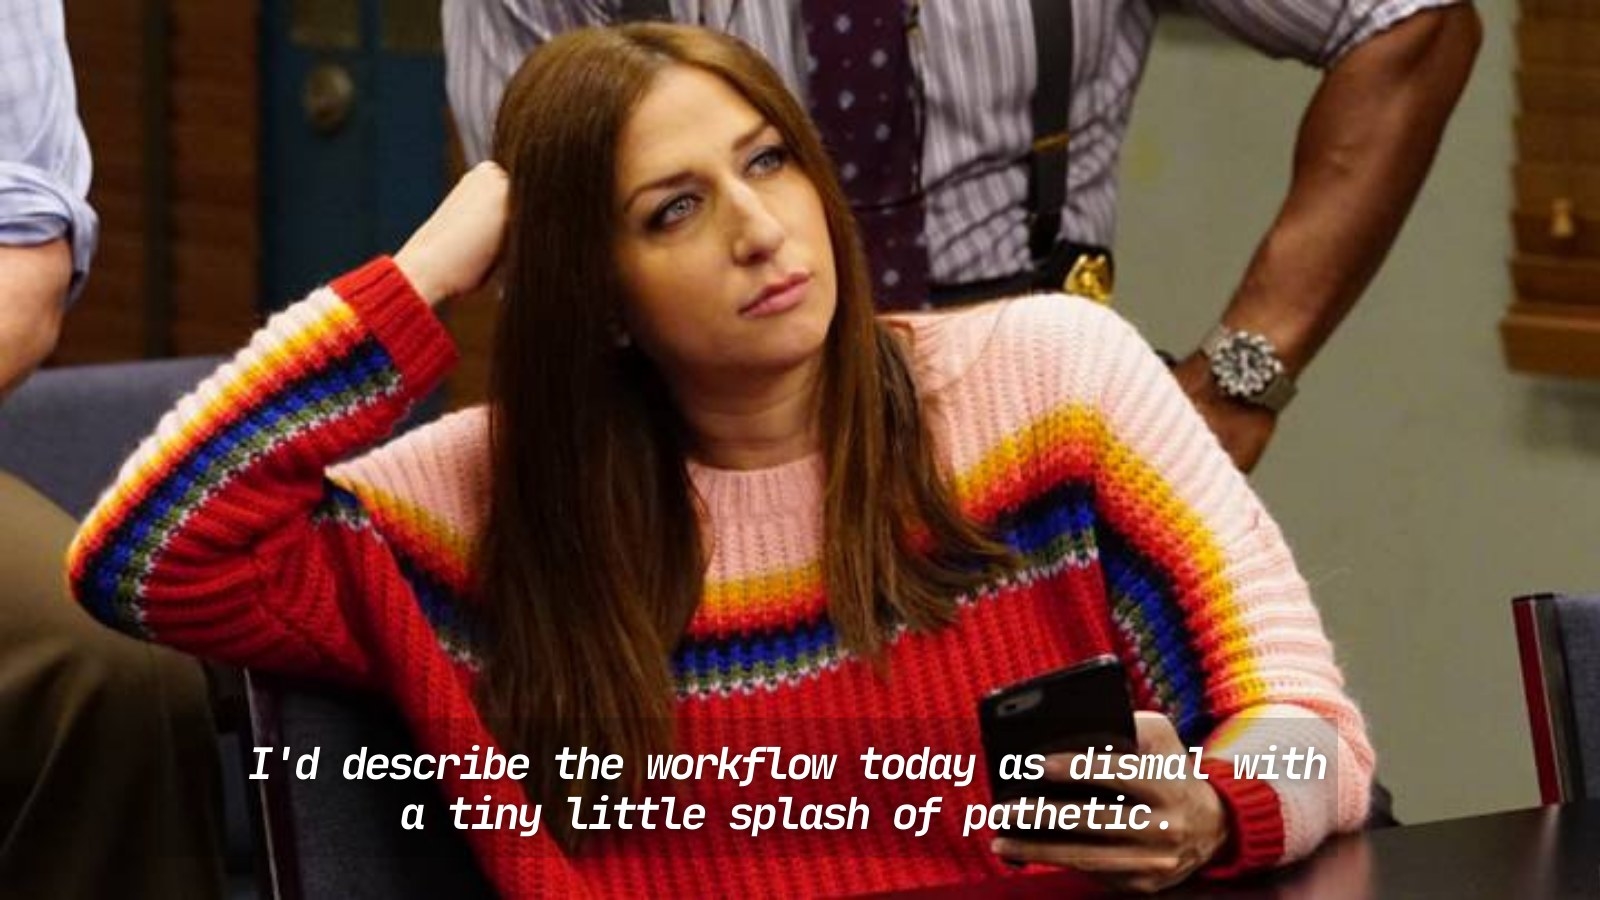 Chelsea Peretti, resting her head on one hand and holding her phone, playing her character as Gina Linetti for the sitcom Brooklyn Nine-Nine